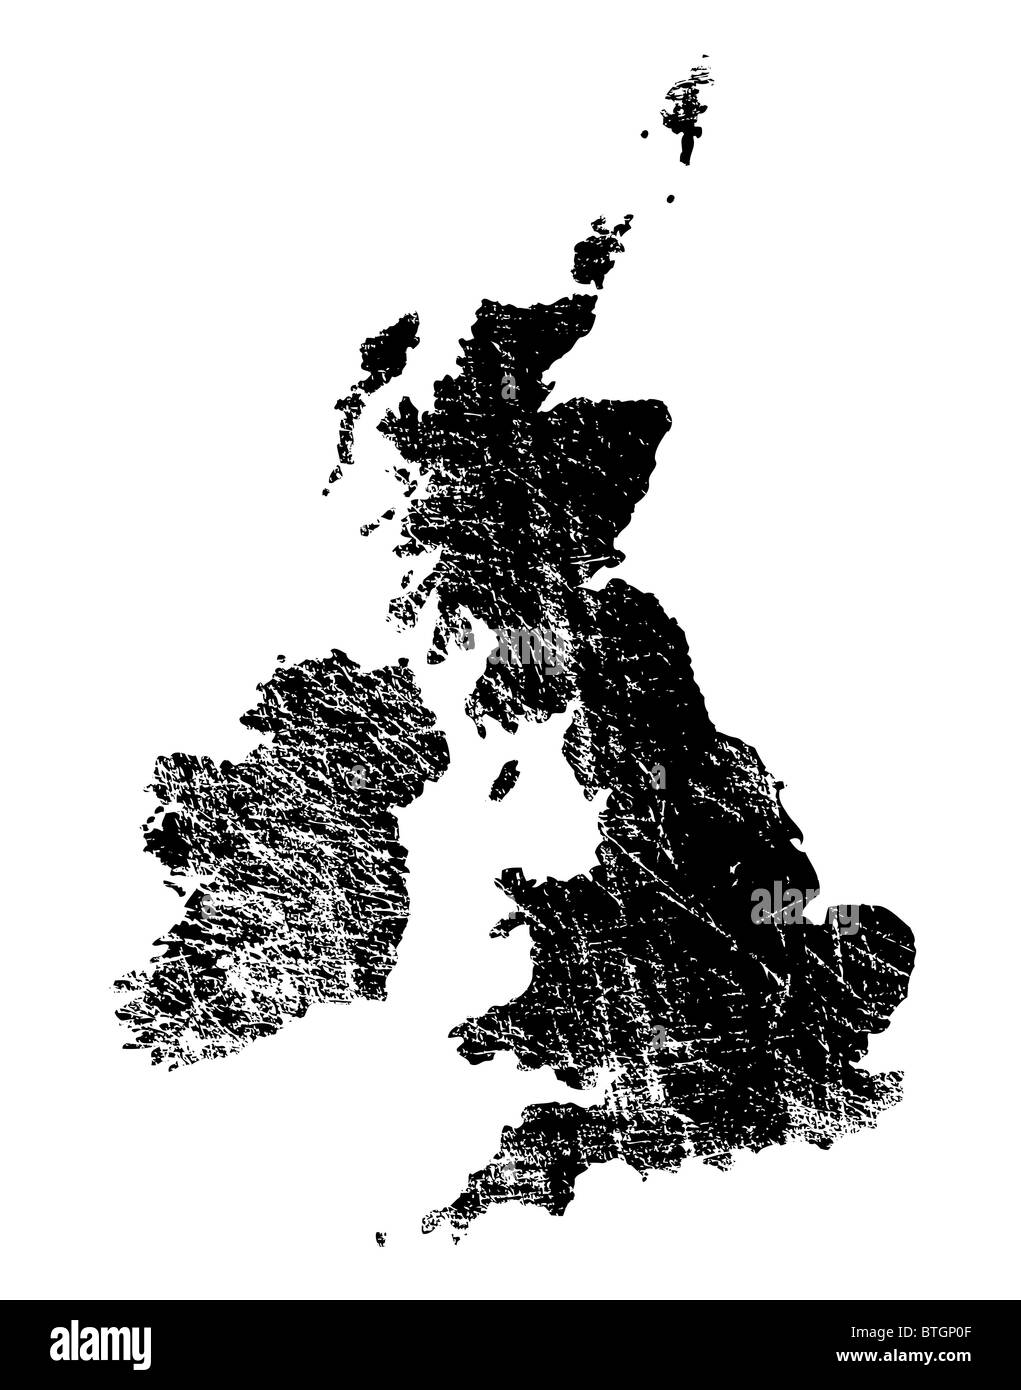 Outline of Great Britain and Ireland with heavy grunge Stock Photo